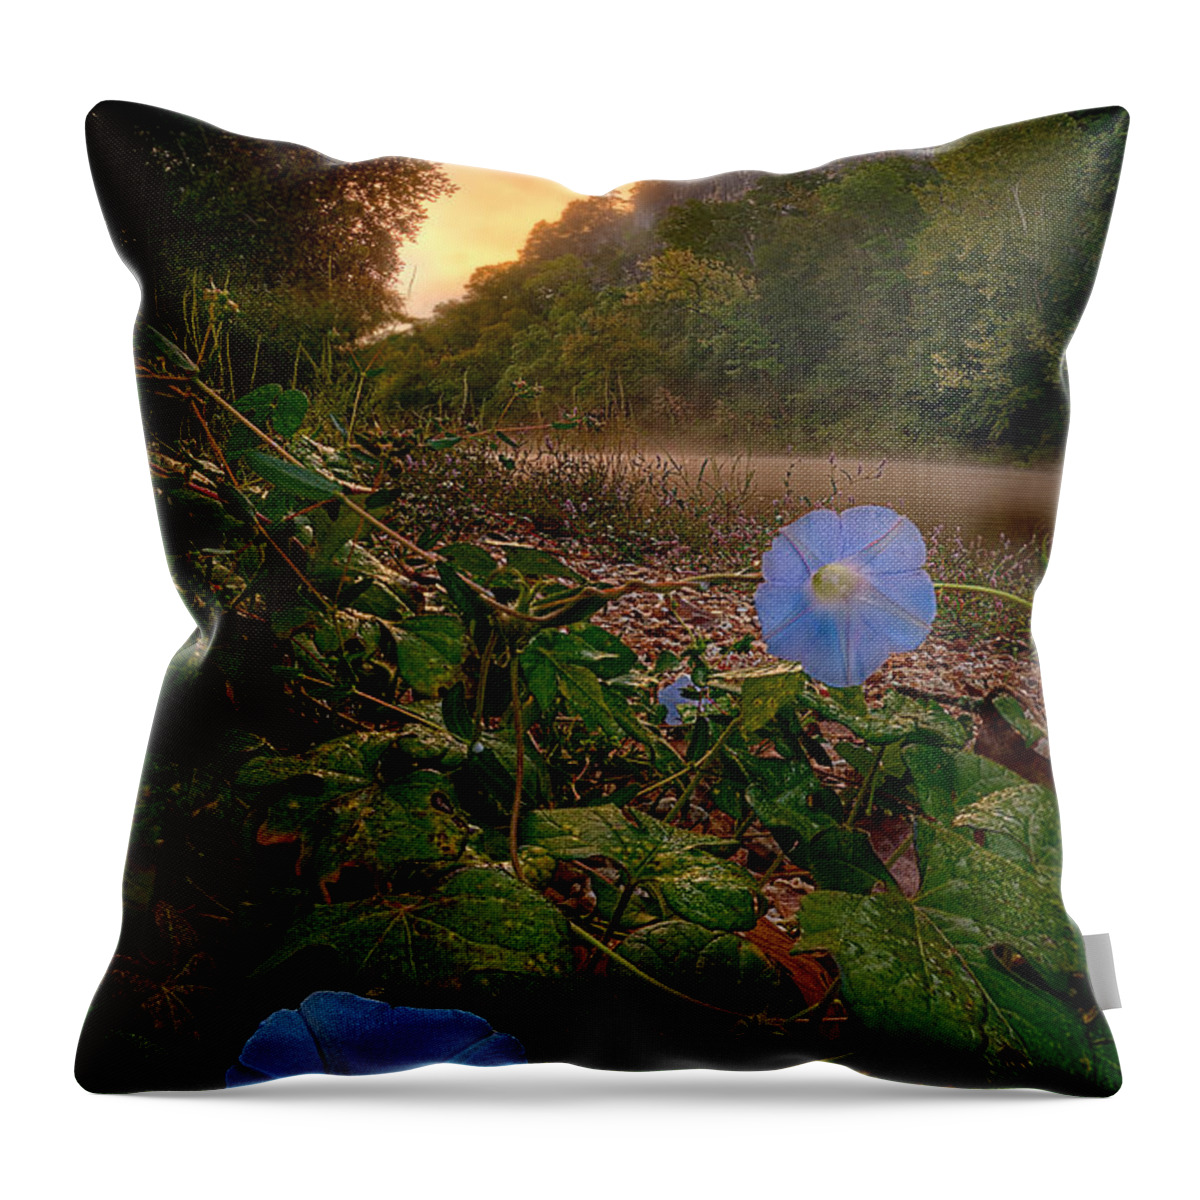 2012 Throw Pillow featuring the photograph Morning Glory by Robert Charity